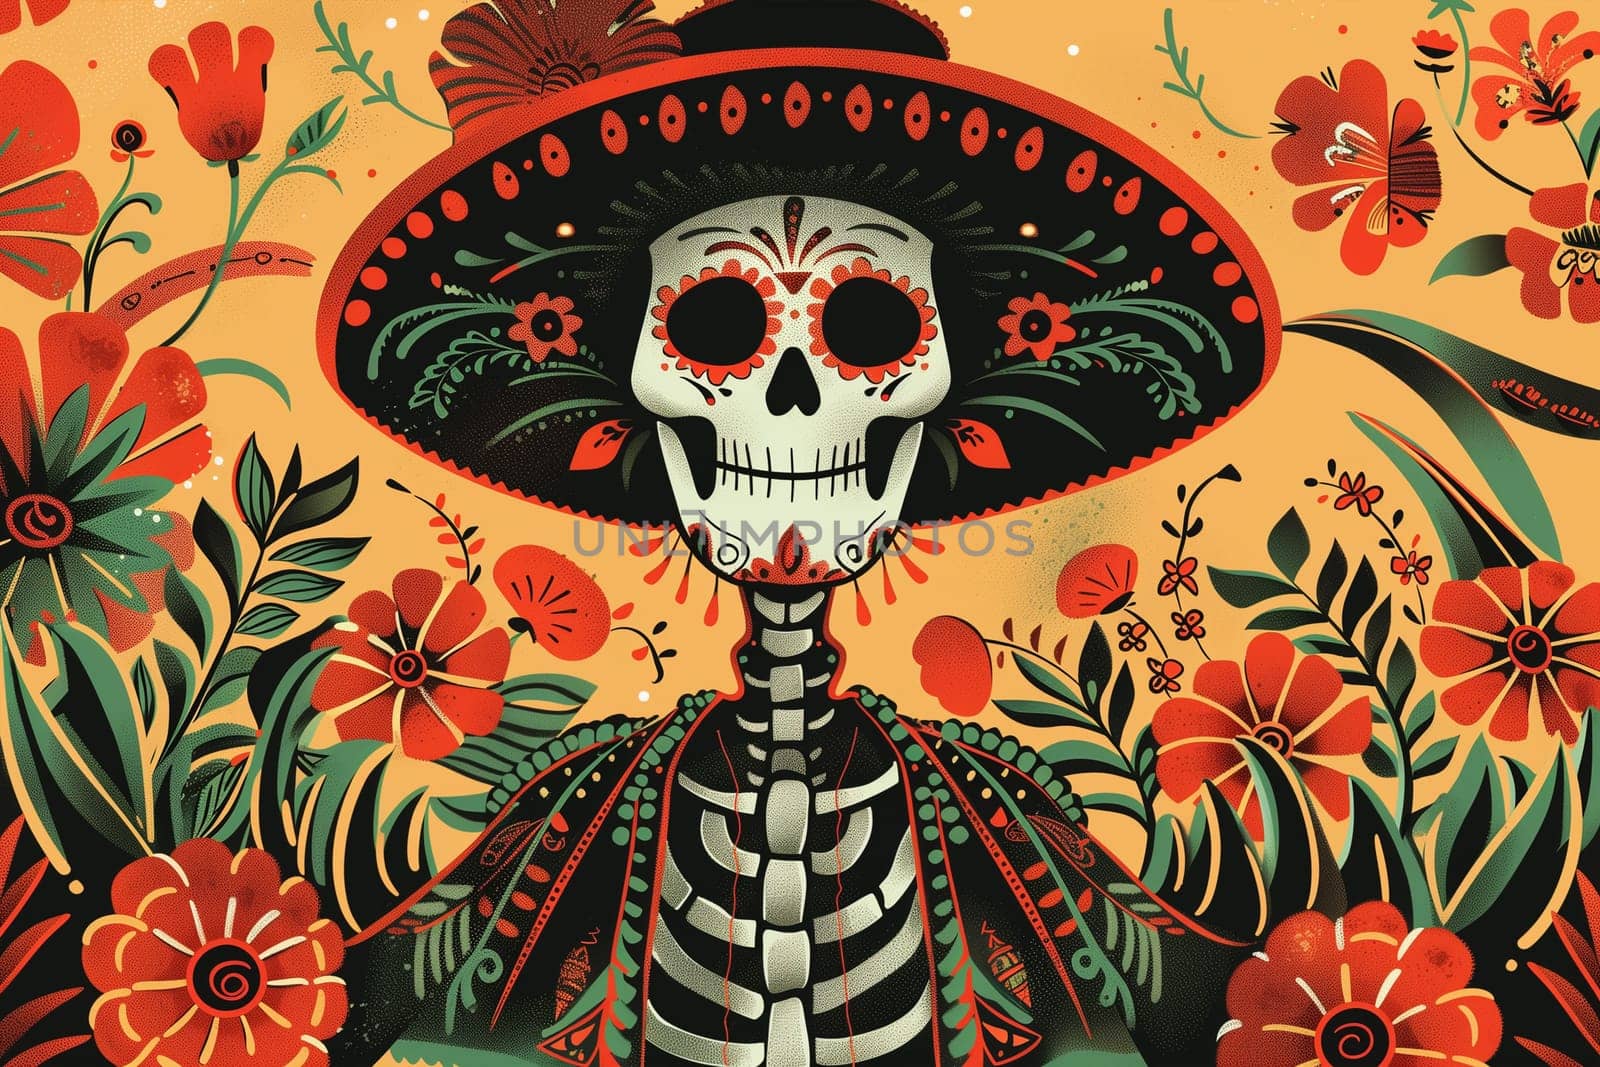 A painting of a skeleton adorned with a traditional Mexican sombrero.